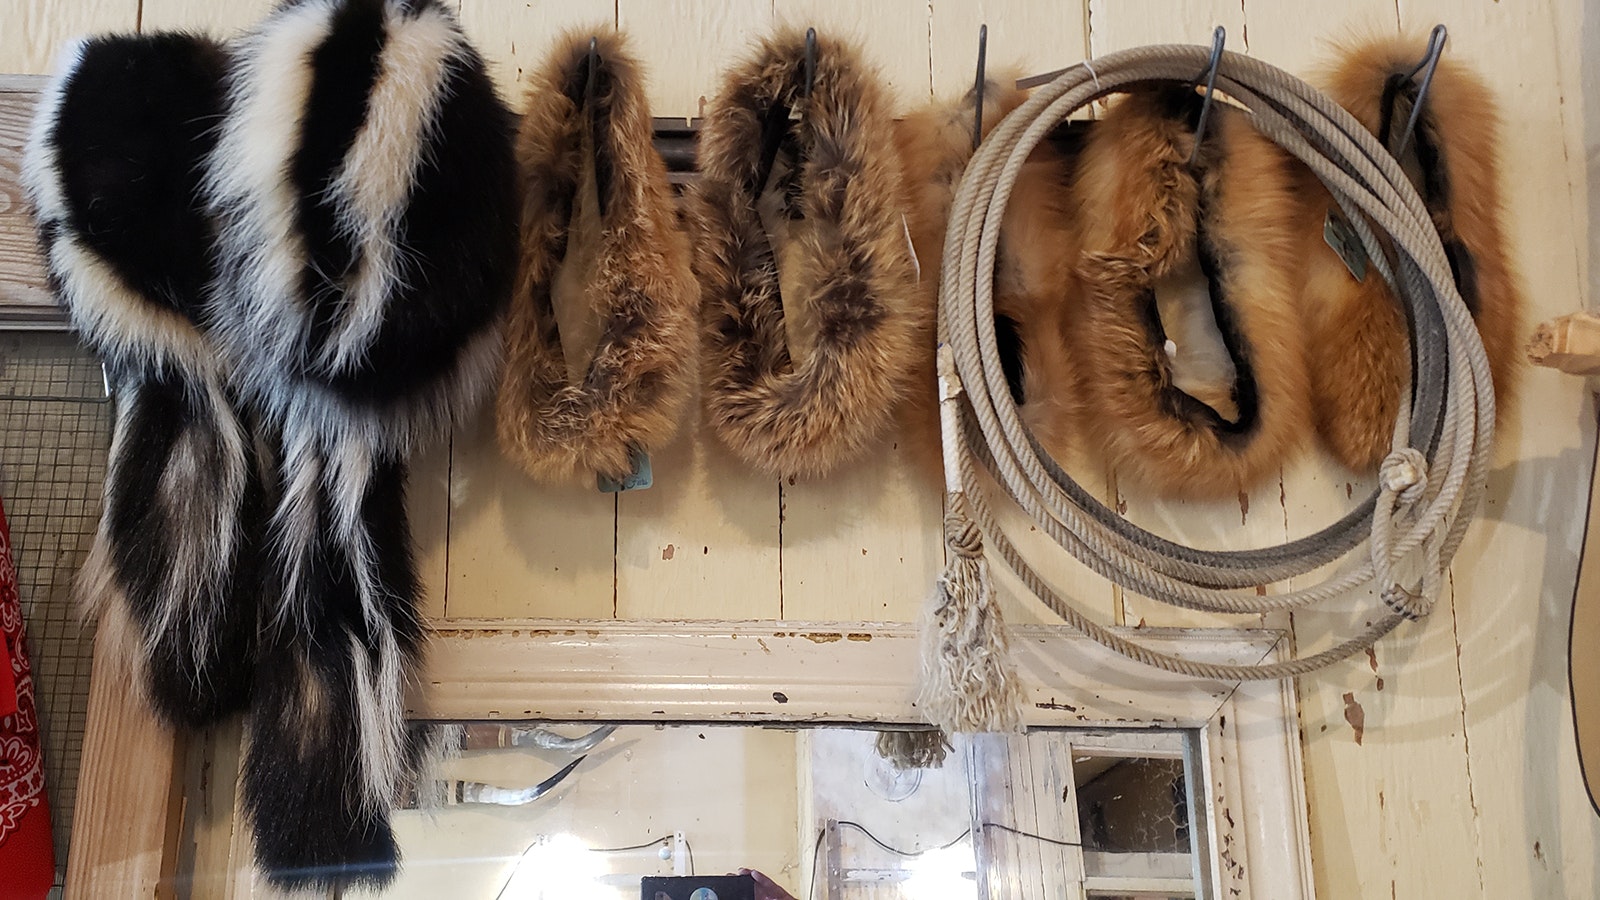 Fur hats hang in a row with a used rope next to colorful new bandanas.